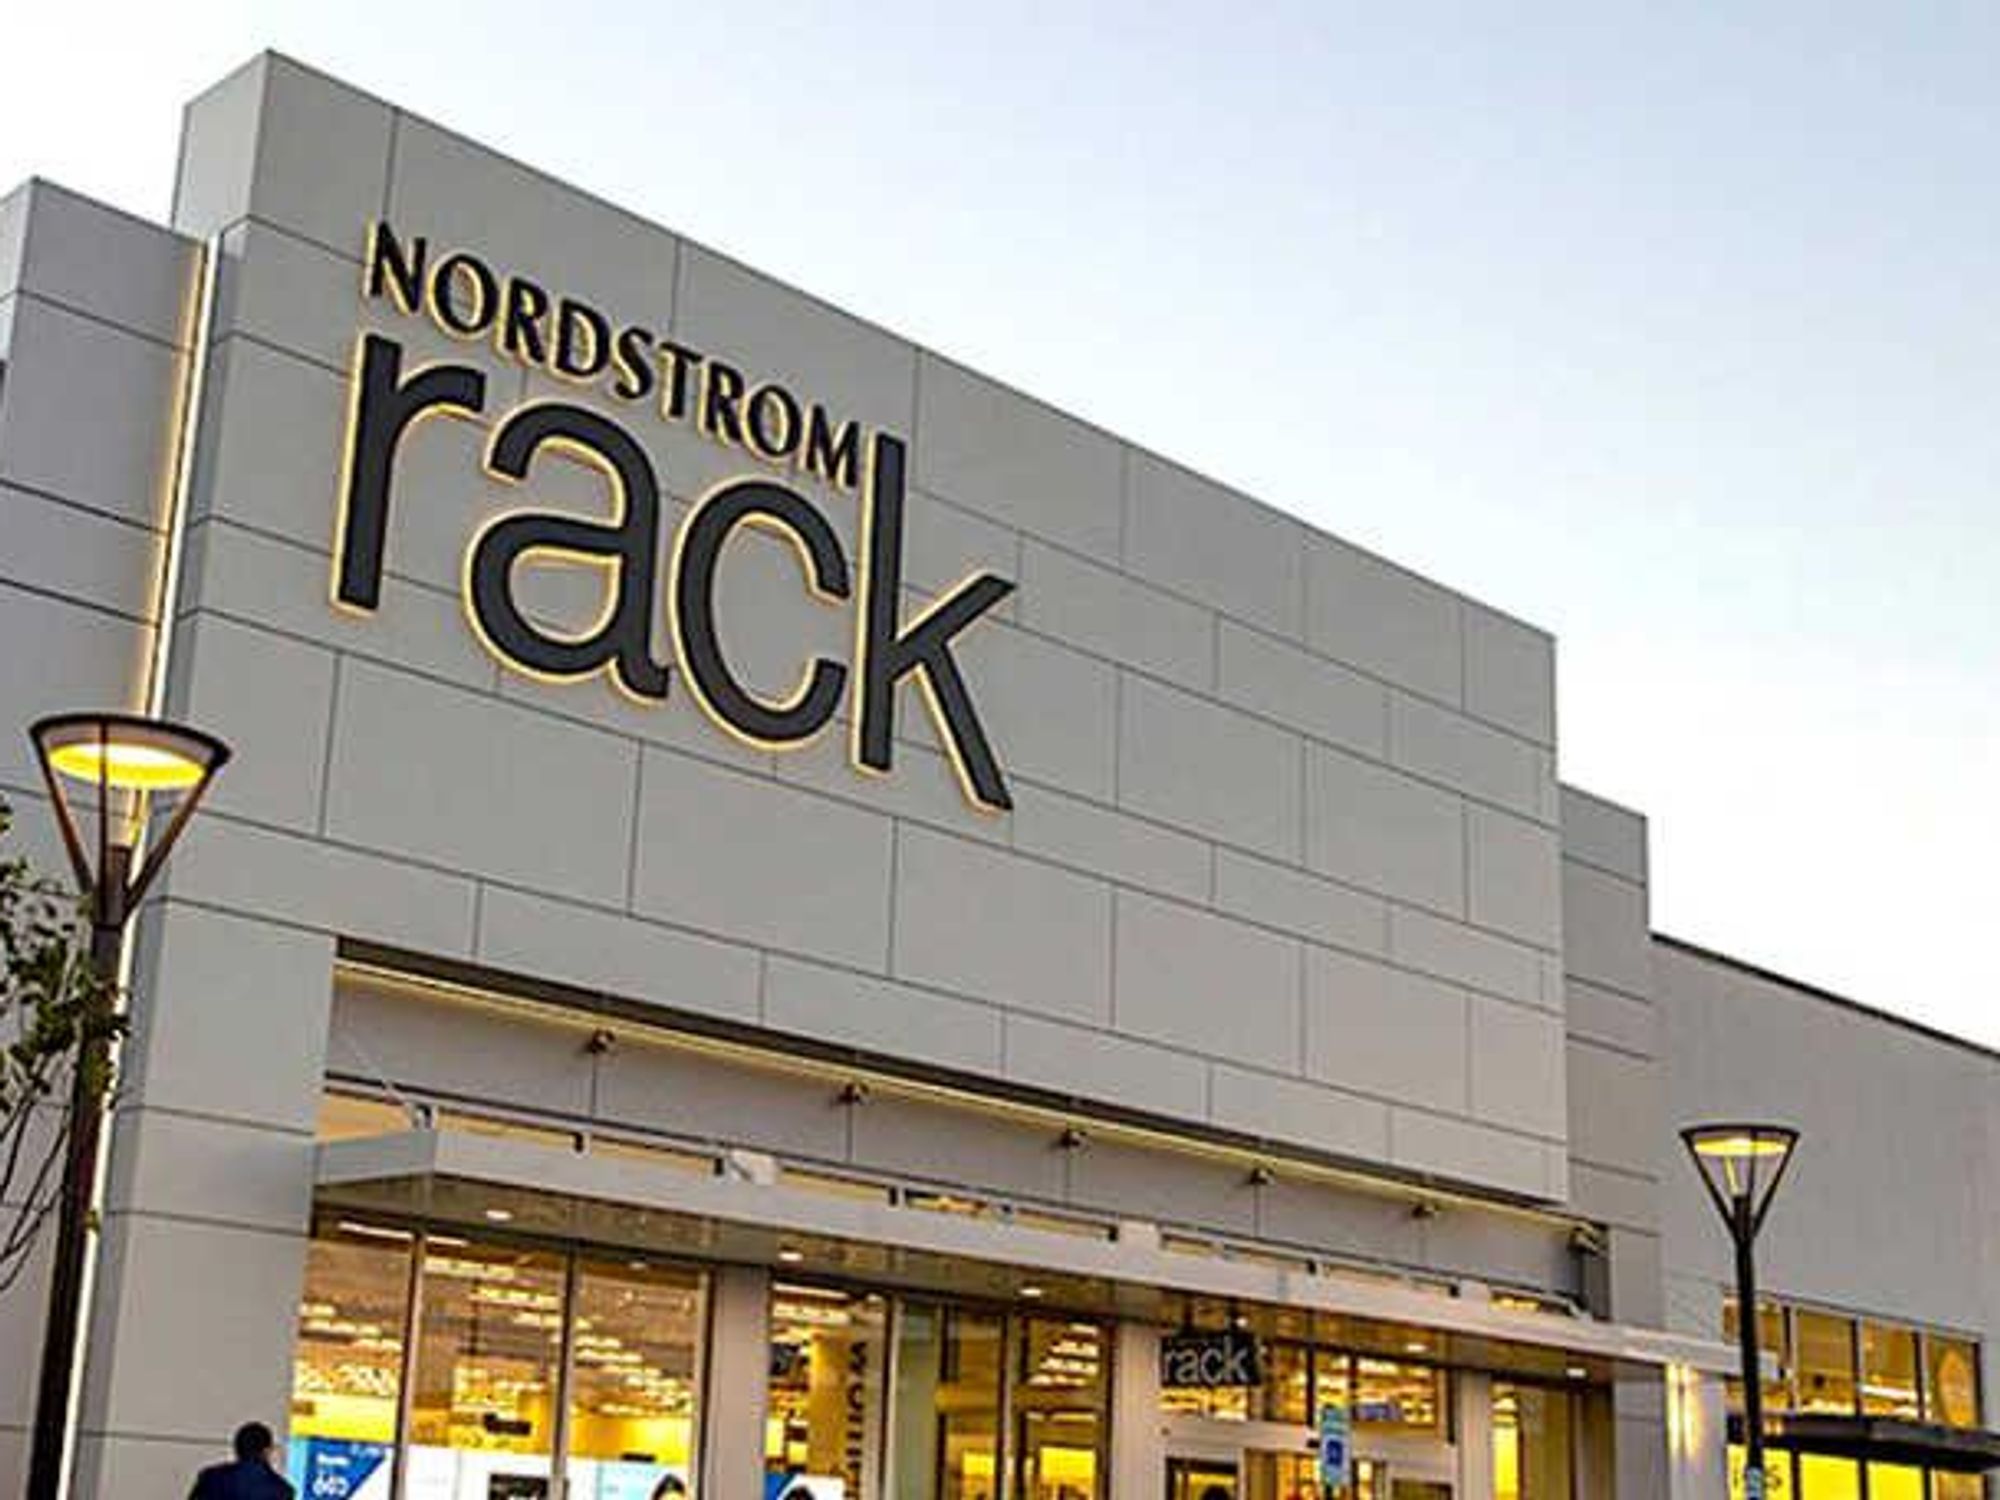 Men's clothing is displayed for sale inside a Nordstrom Rack store